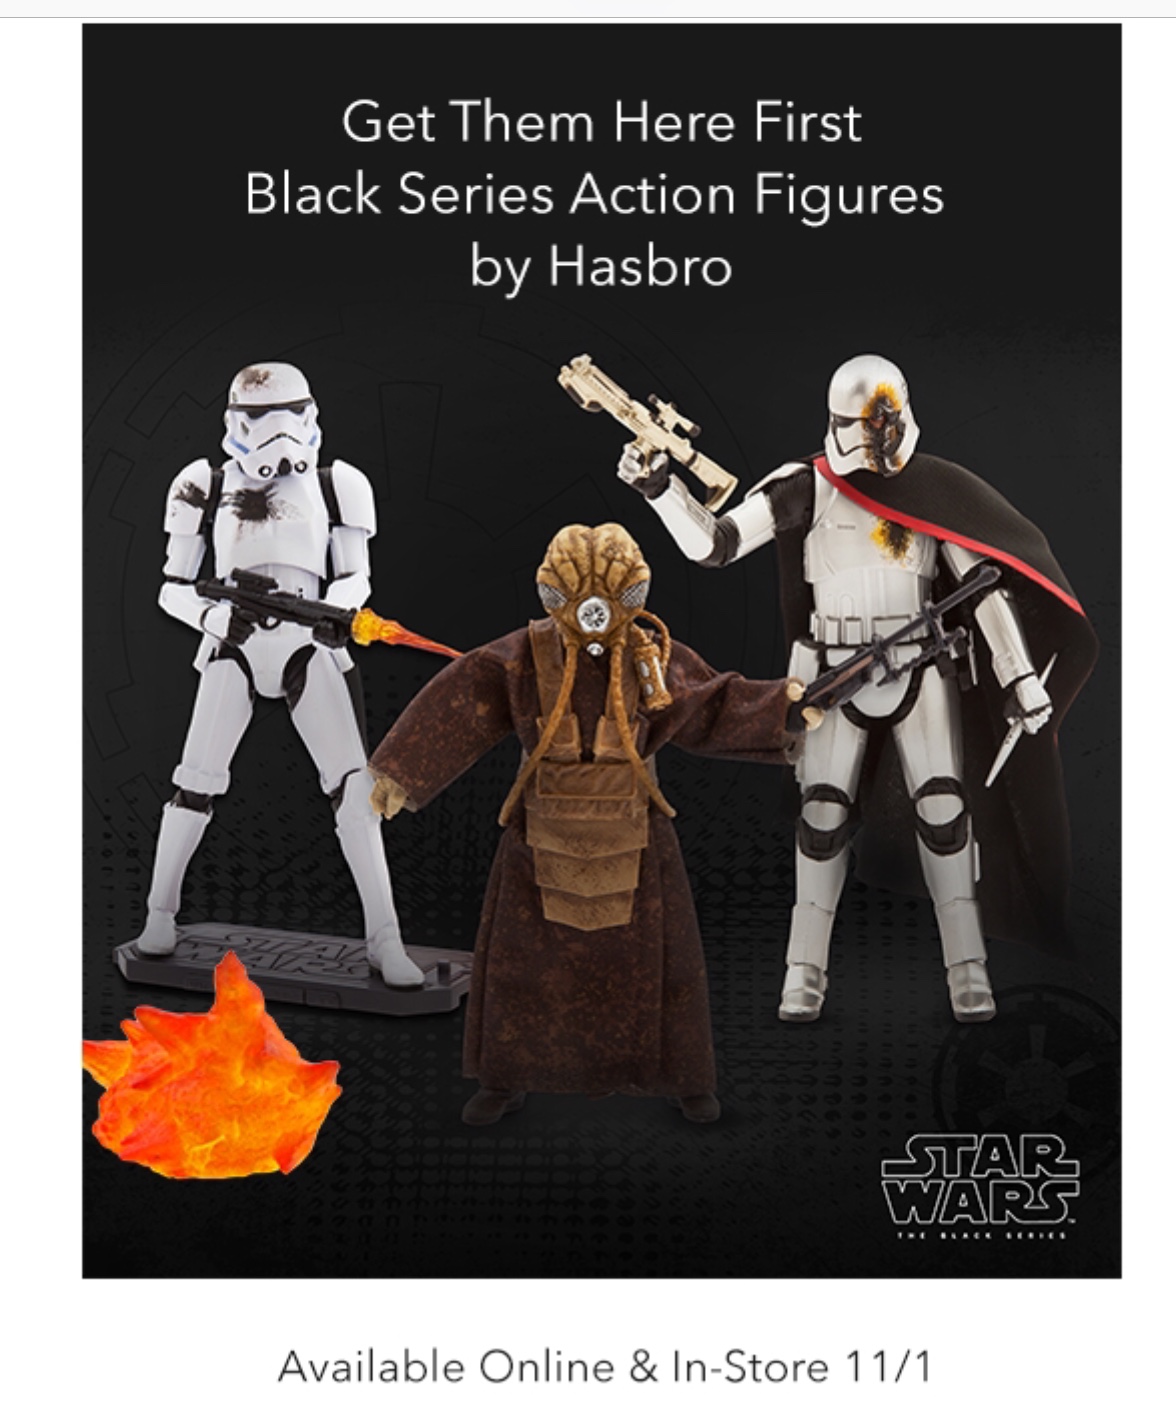 The Black Series At The Disney Store